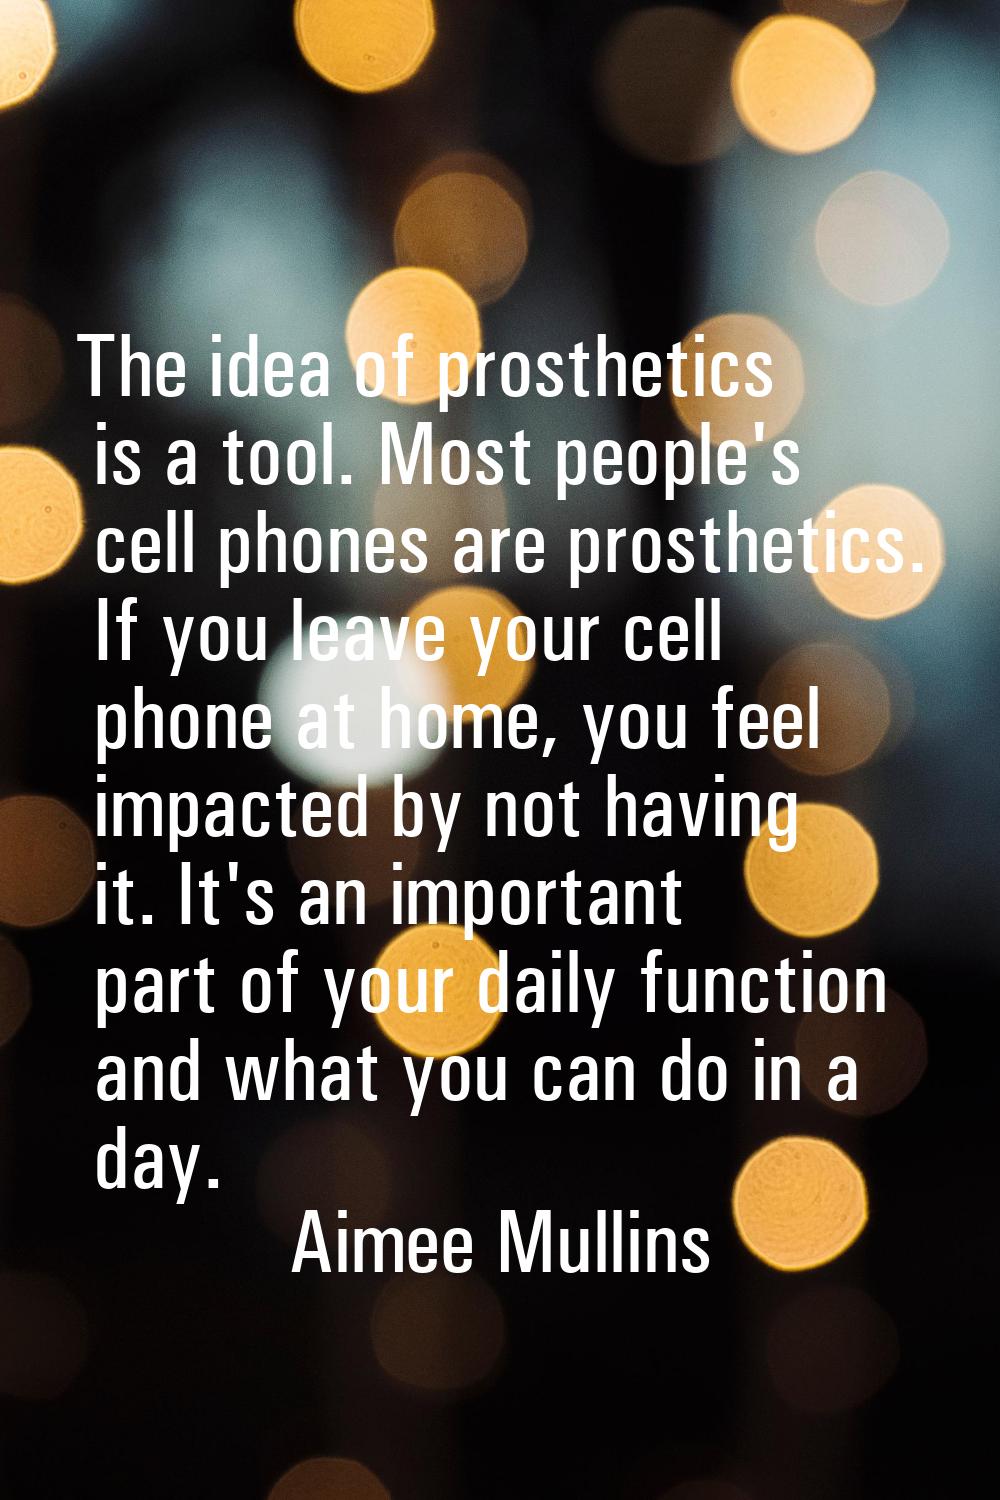 The idea of prosthetics is a tool. Most people's cell phones are prosthetics. If you leave your cel